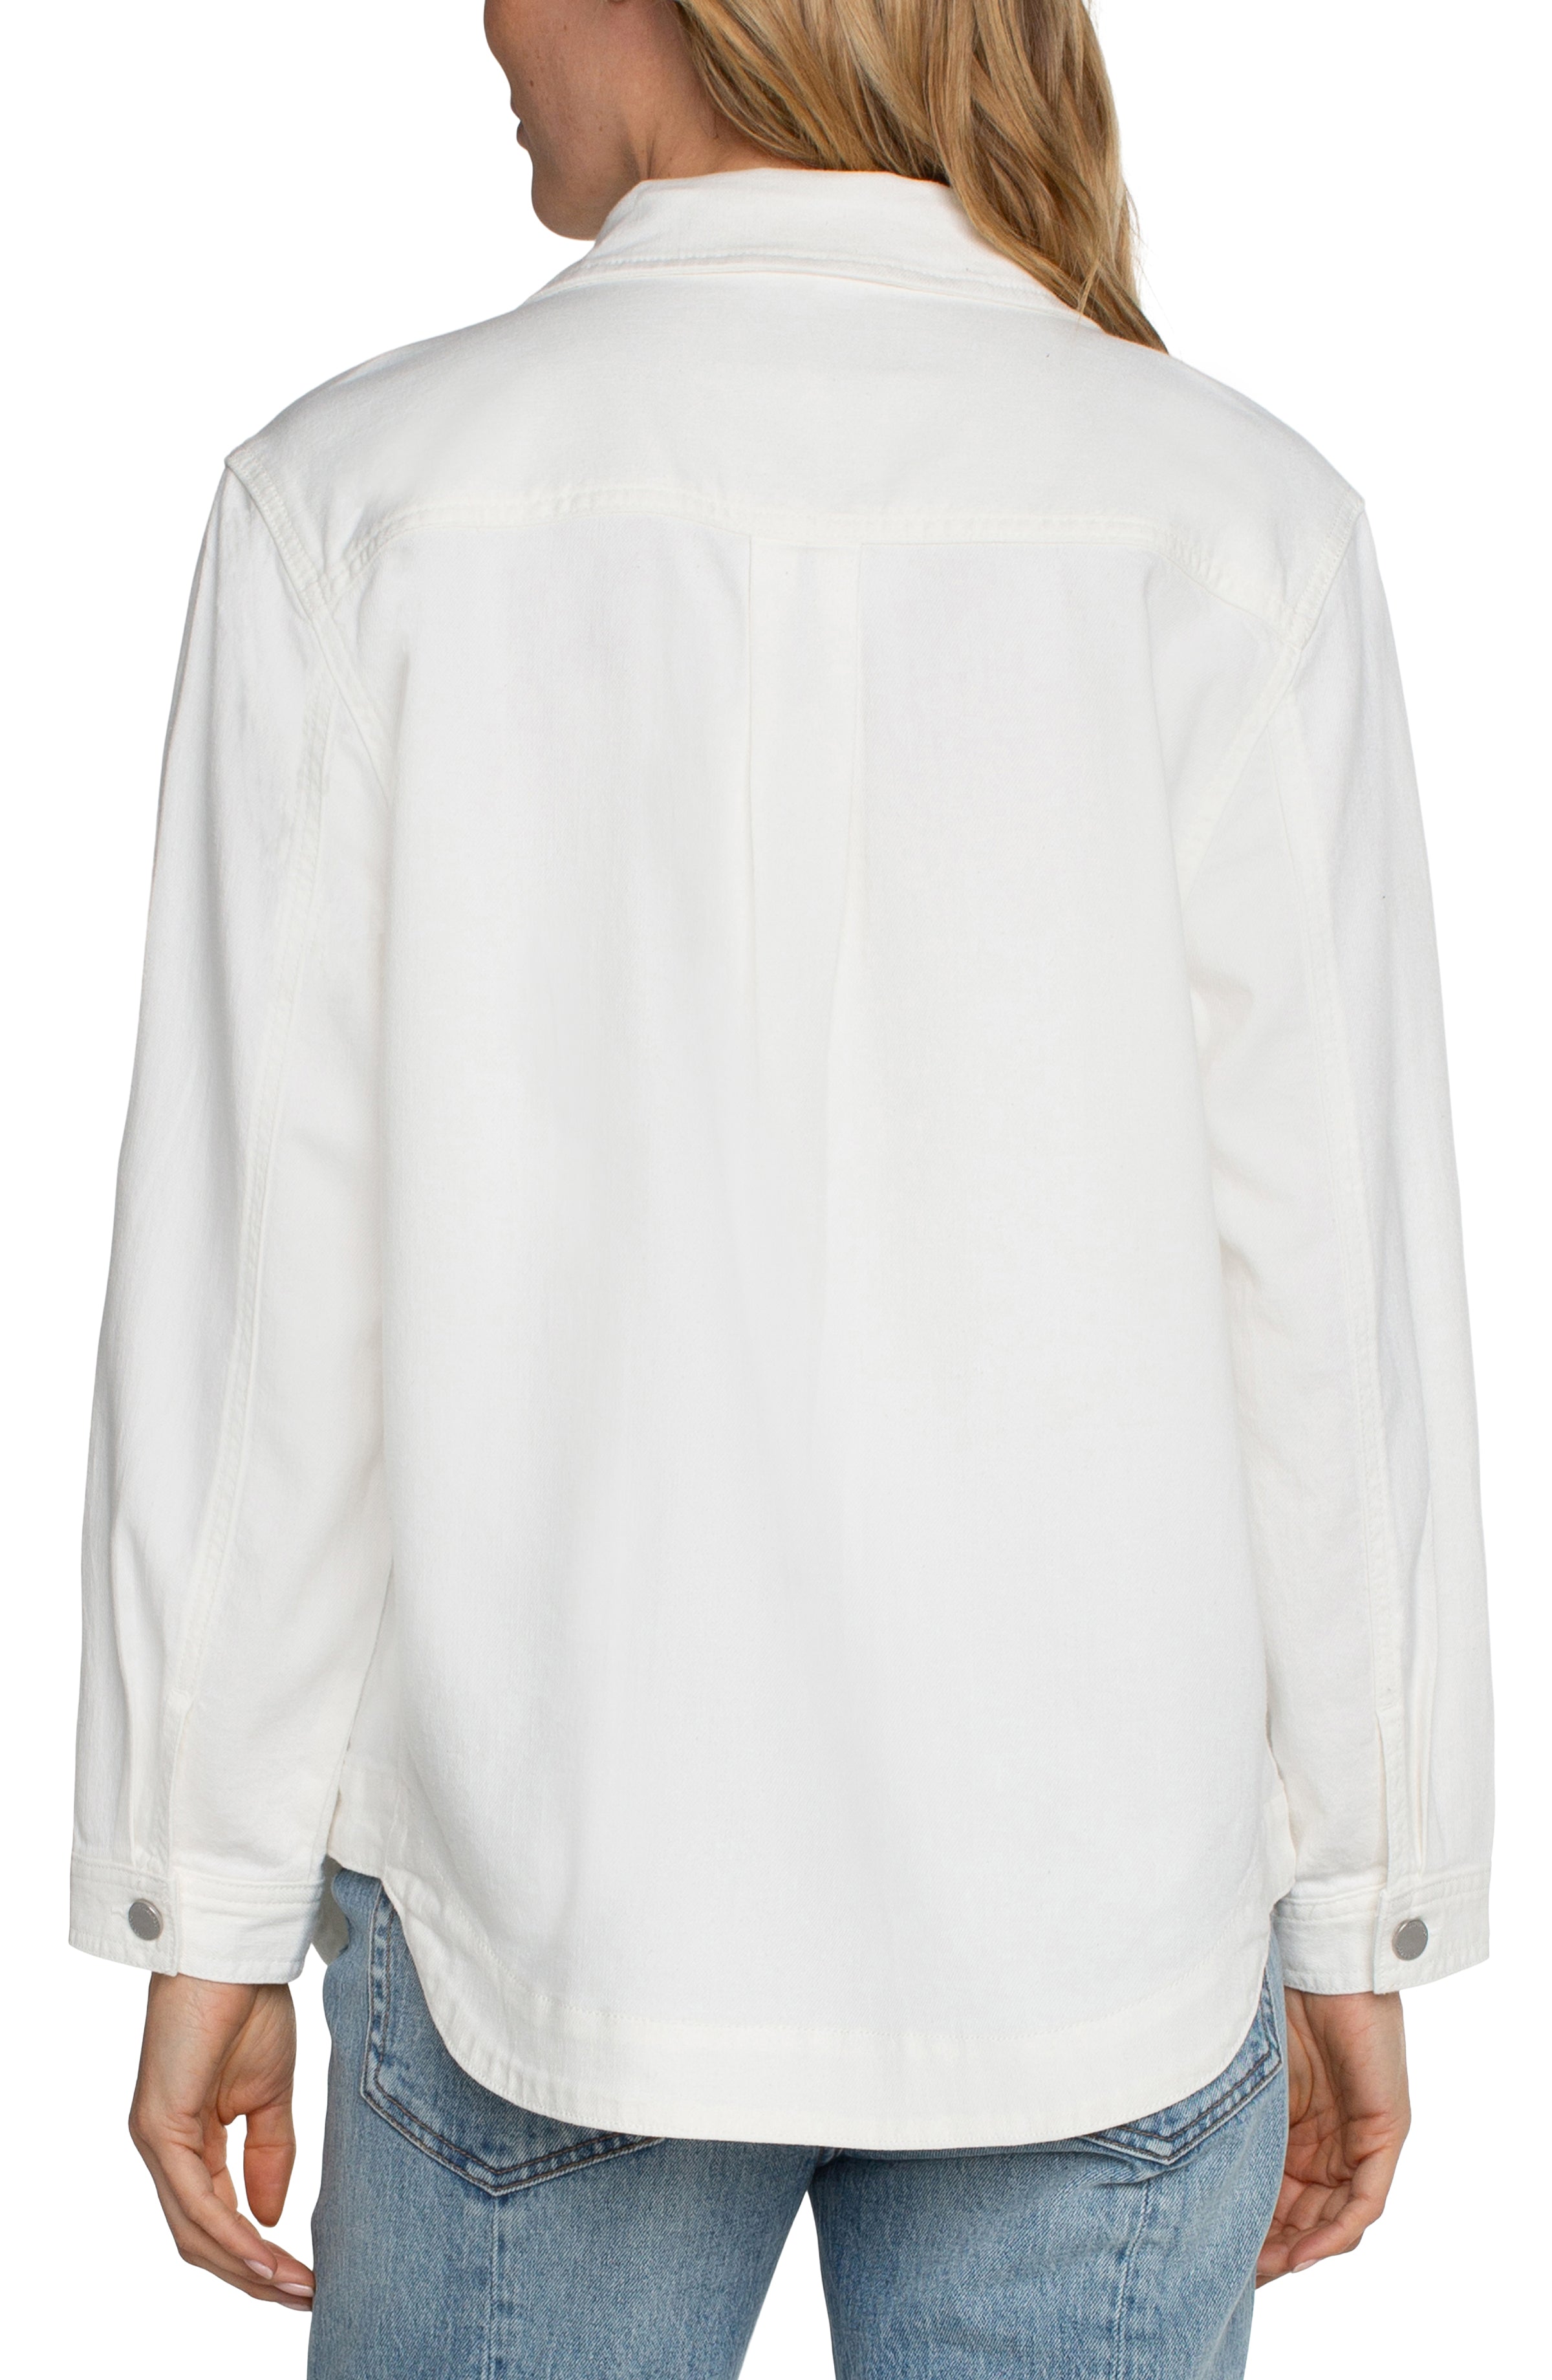 LVP Casual Jacket - Bright White Back View